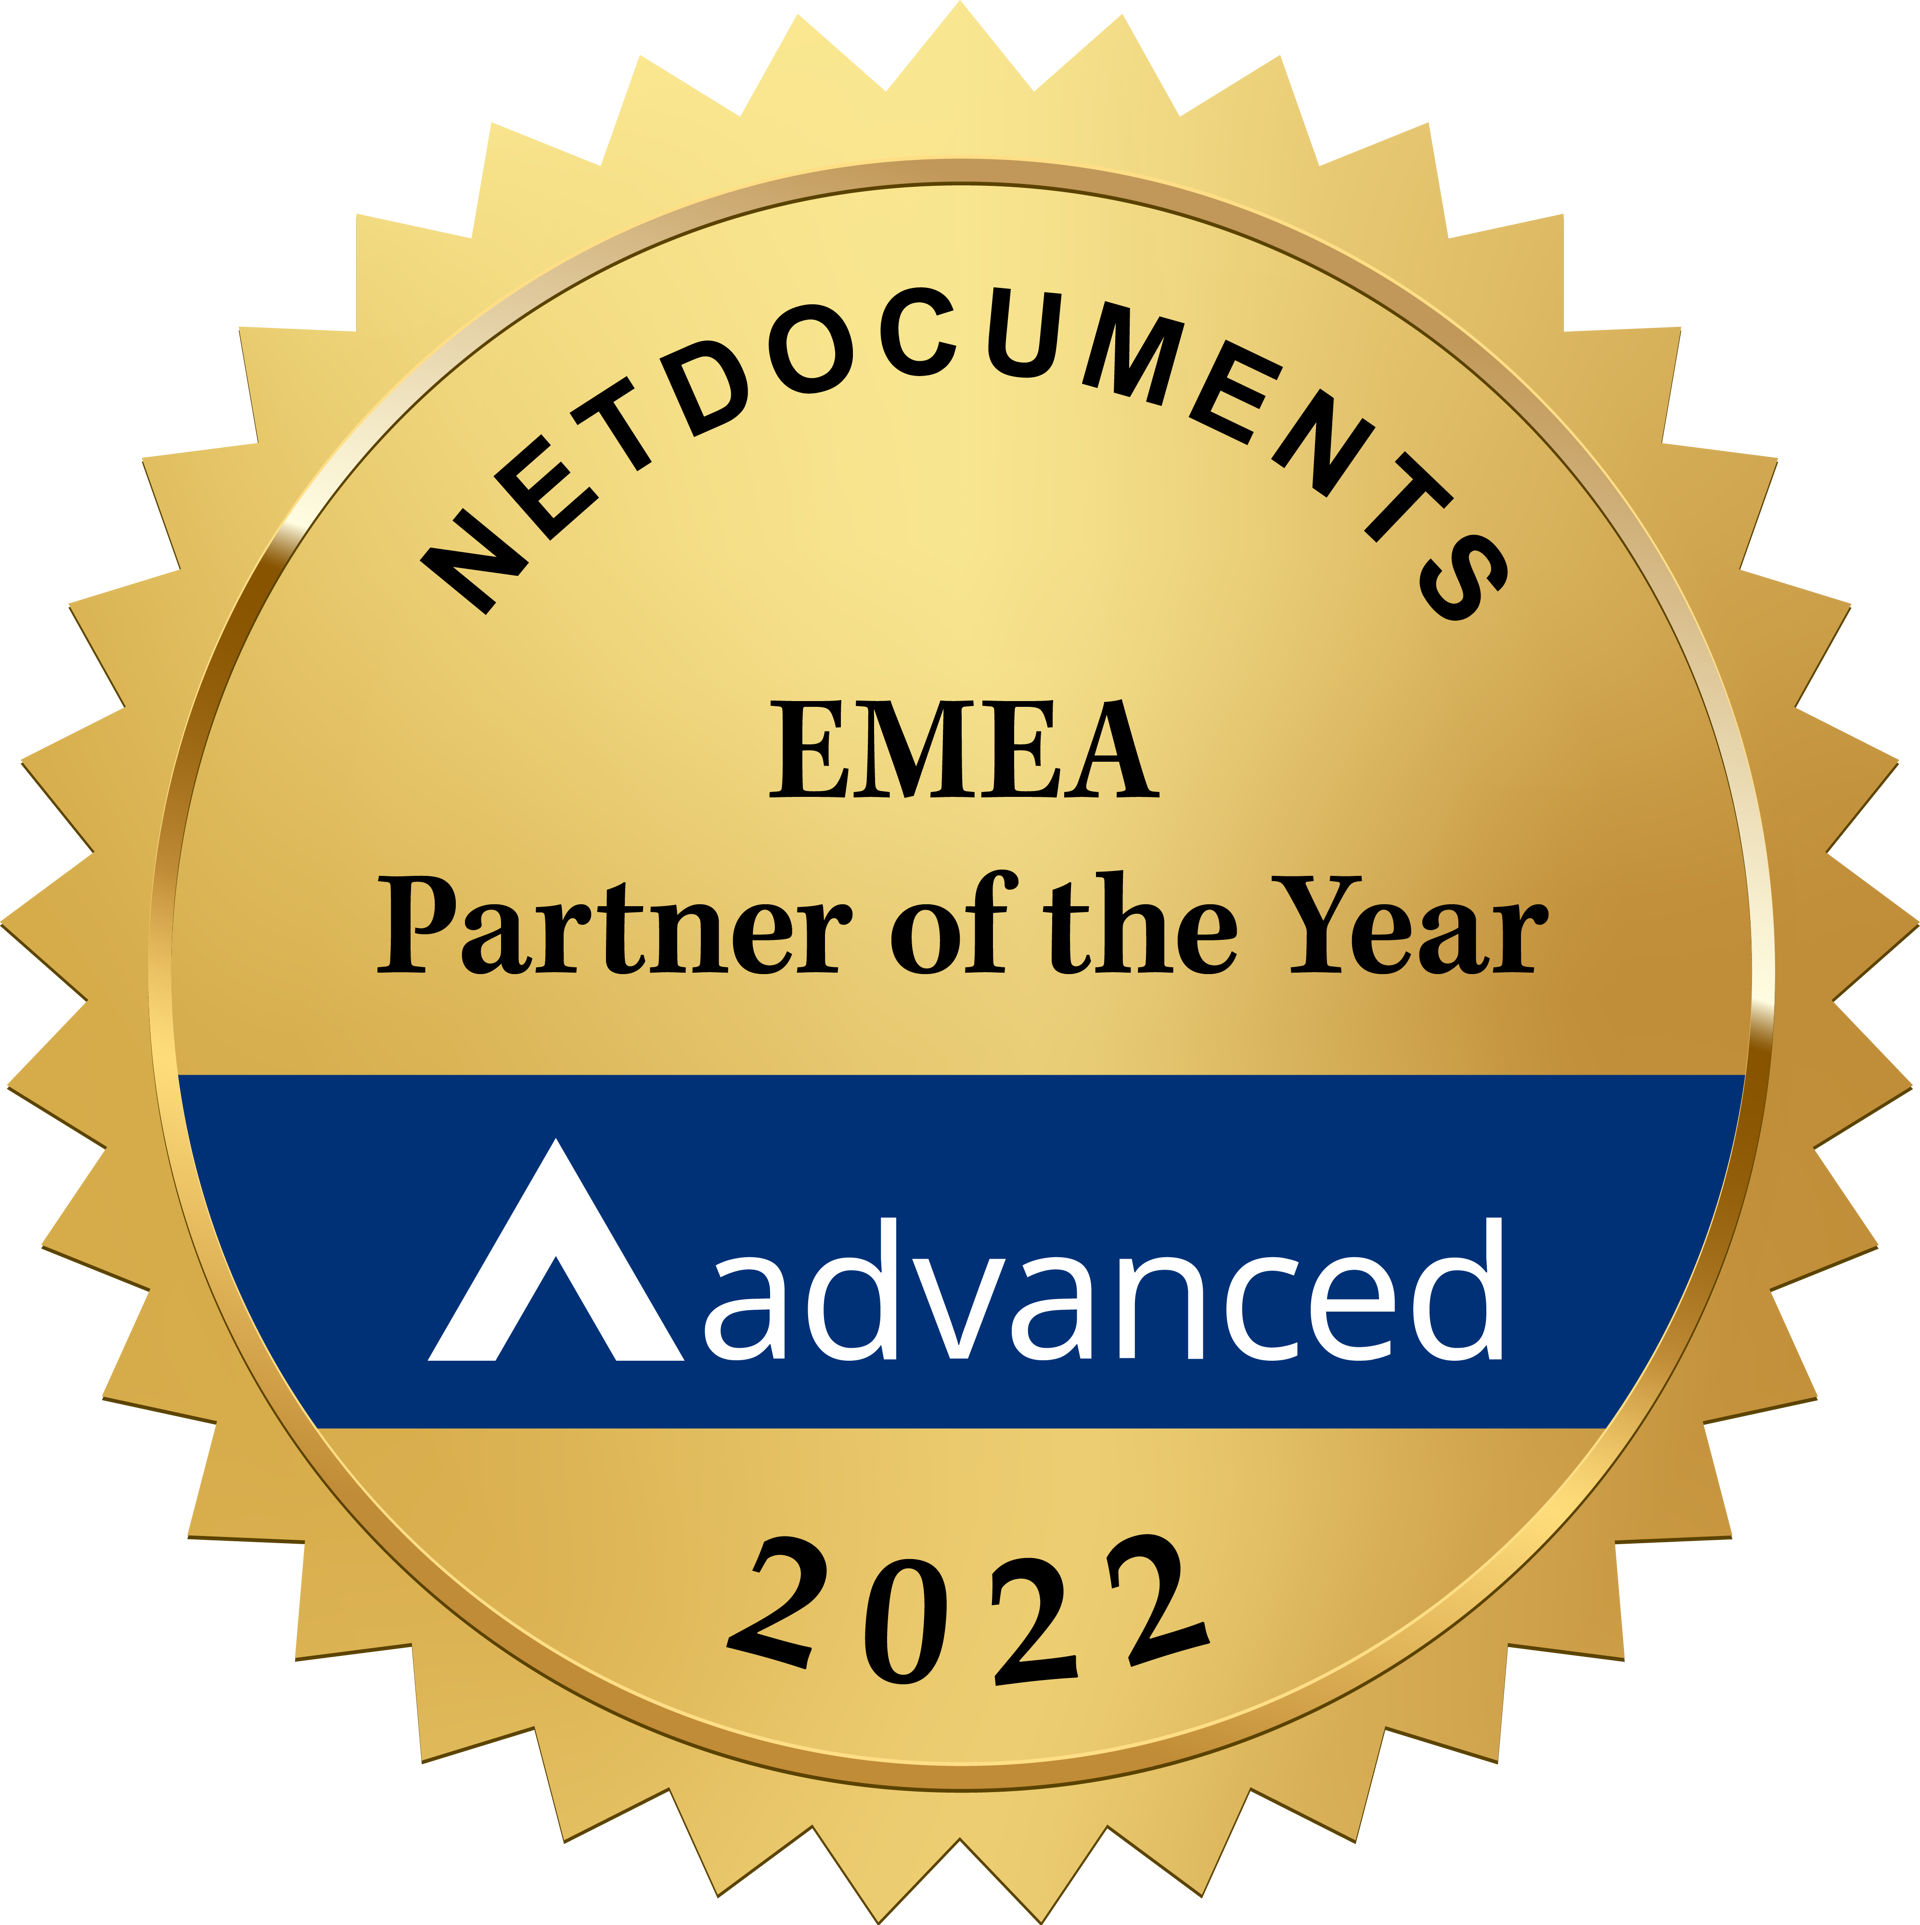 Advanced Recognised during NetDocuments Inspire Conference – EMEA Partner of the Year 2022   NetDocuments, the #1 trusted cloud platform where legal professionals do their best work, announced the winners of their Inspire 2022 Partner Awards.